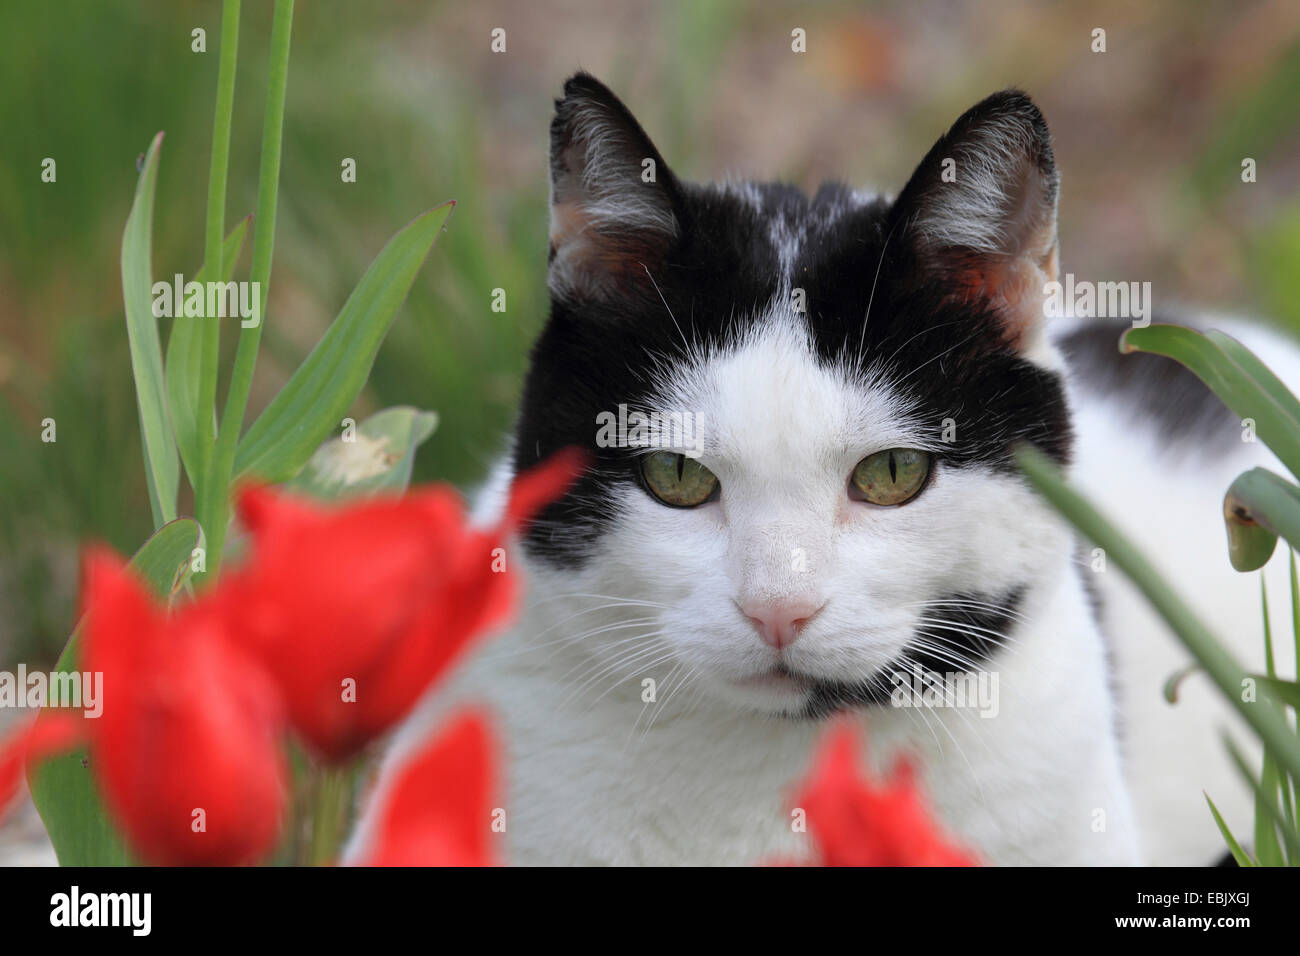 domestic cat, house cat (Felis silvestris f. catus), black and white cat sitting in a flower bed Stock Photo